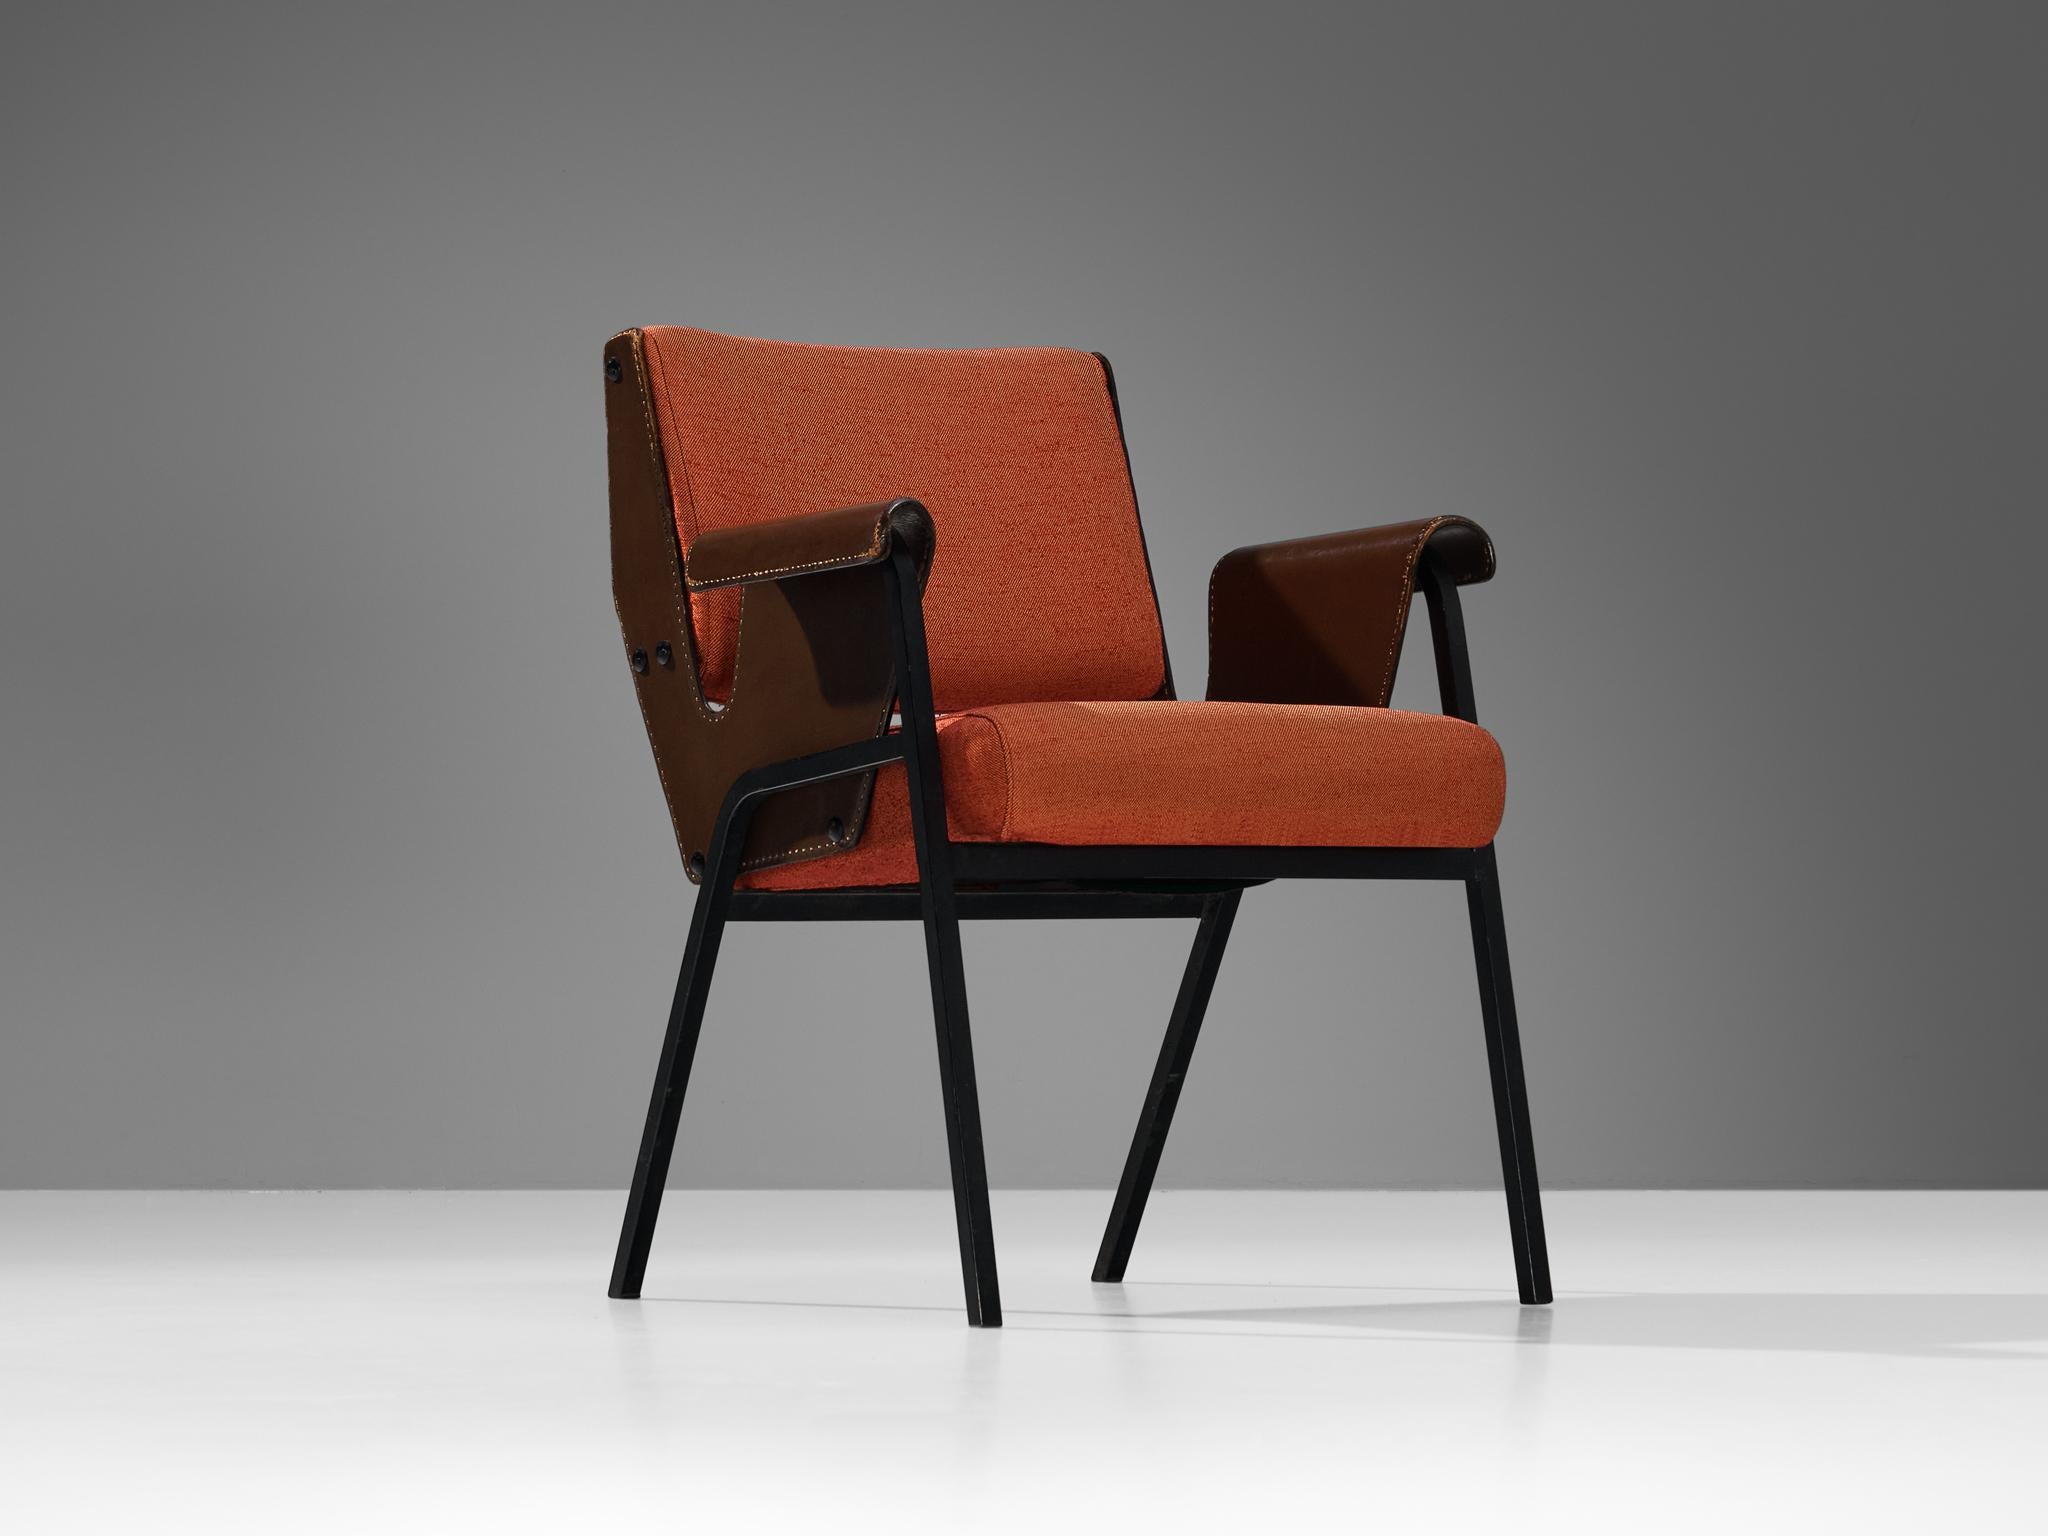 Gustavo Pulitzer for Arflex, 'Albenga' armchair, leather, fabric, enamelled steel, Italy ,1955 

A streamlined design by Italian designer and architect Gustavo Pulitzer, which with its practicality and impressive sculptural presence, embodies the